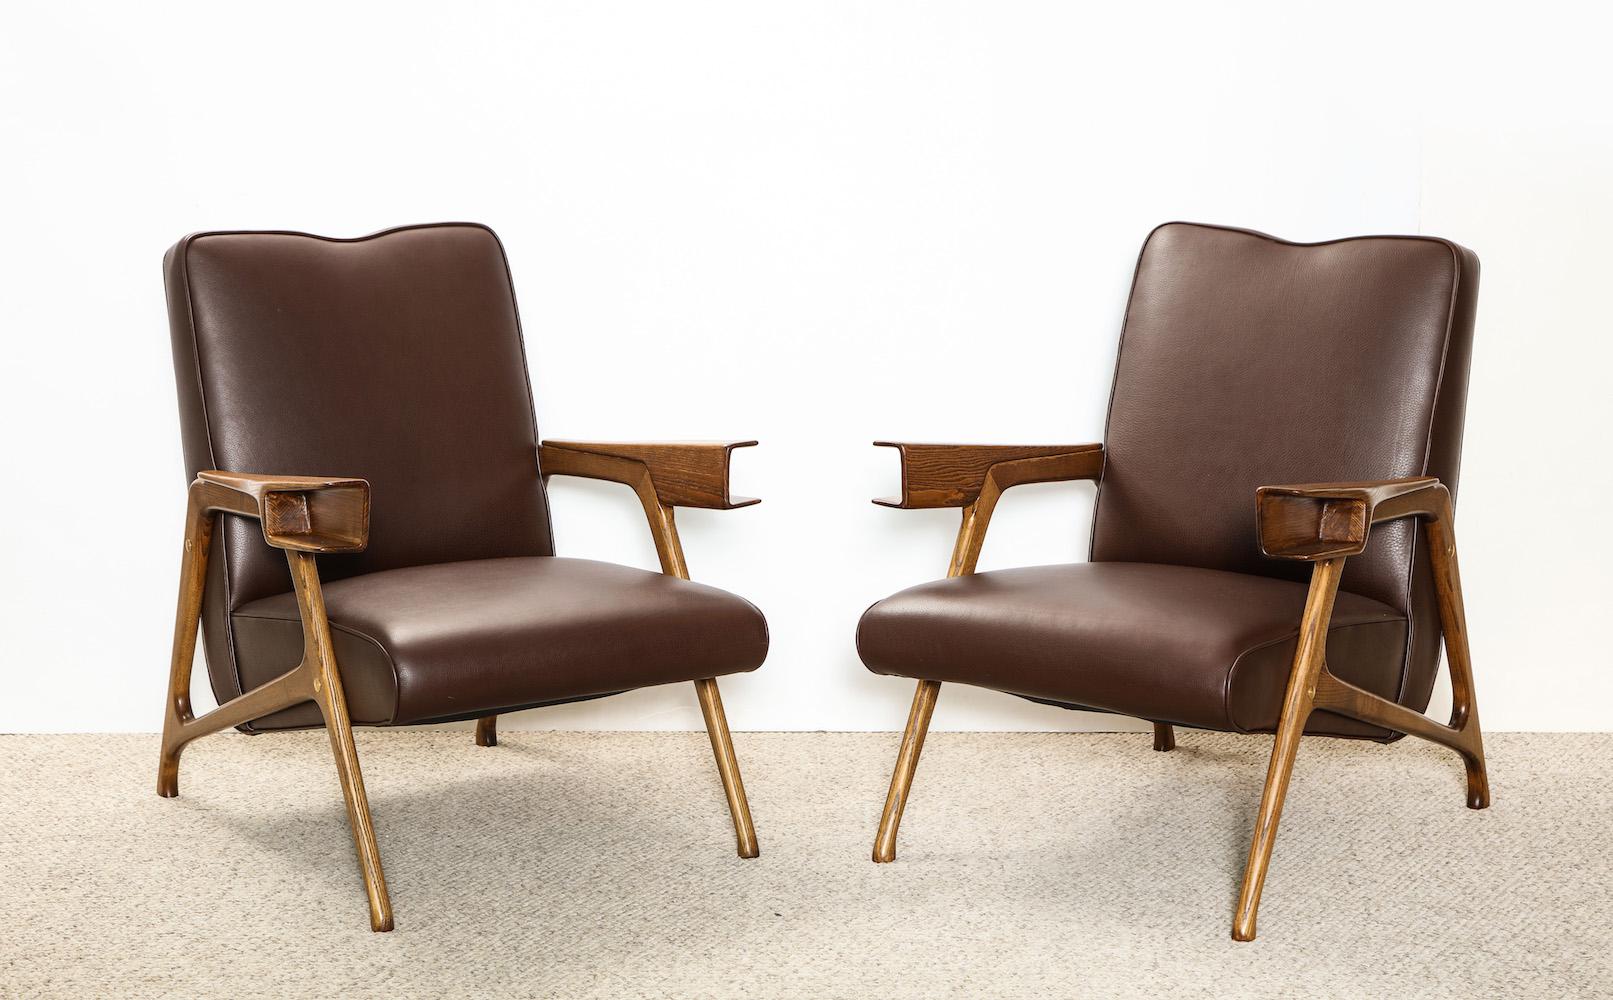 Architectural pair of lounge chairs attributed to Augusto Romano. Solid oak architectural frame, with brown leather upholstered seat and back. Fantastic detailing and strong look.
  